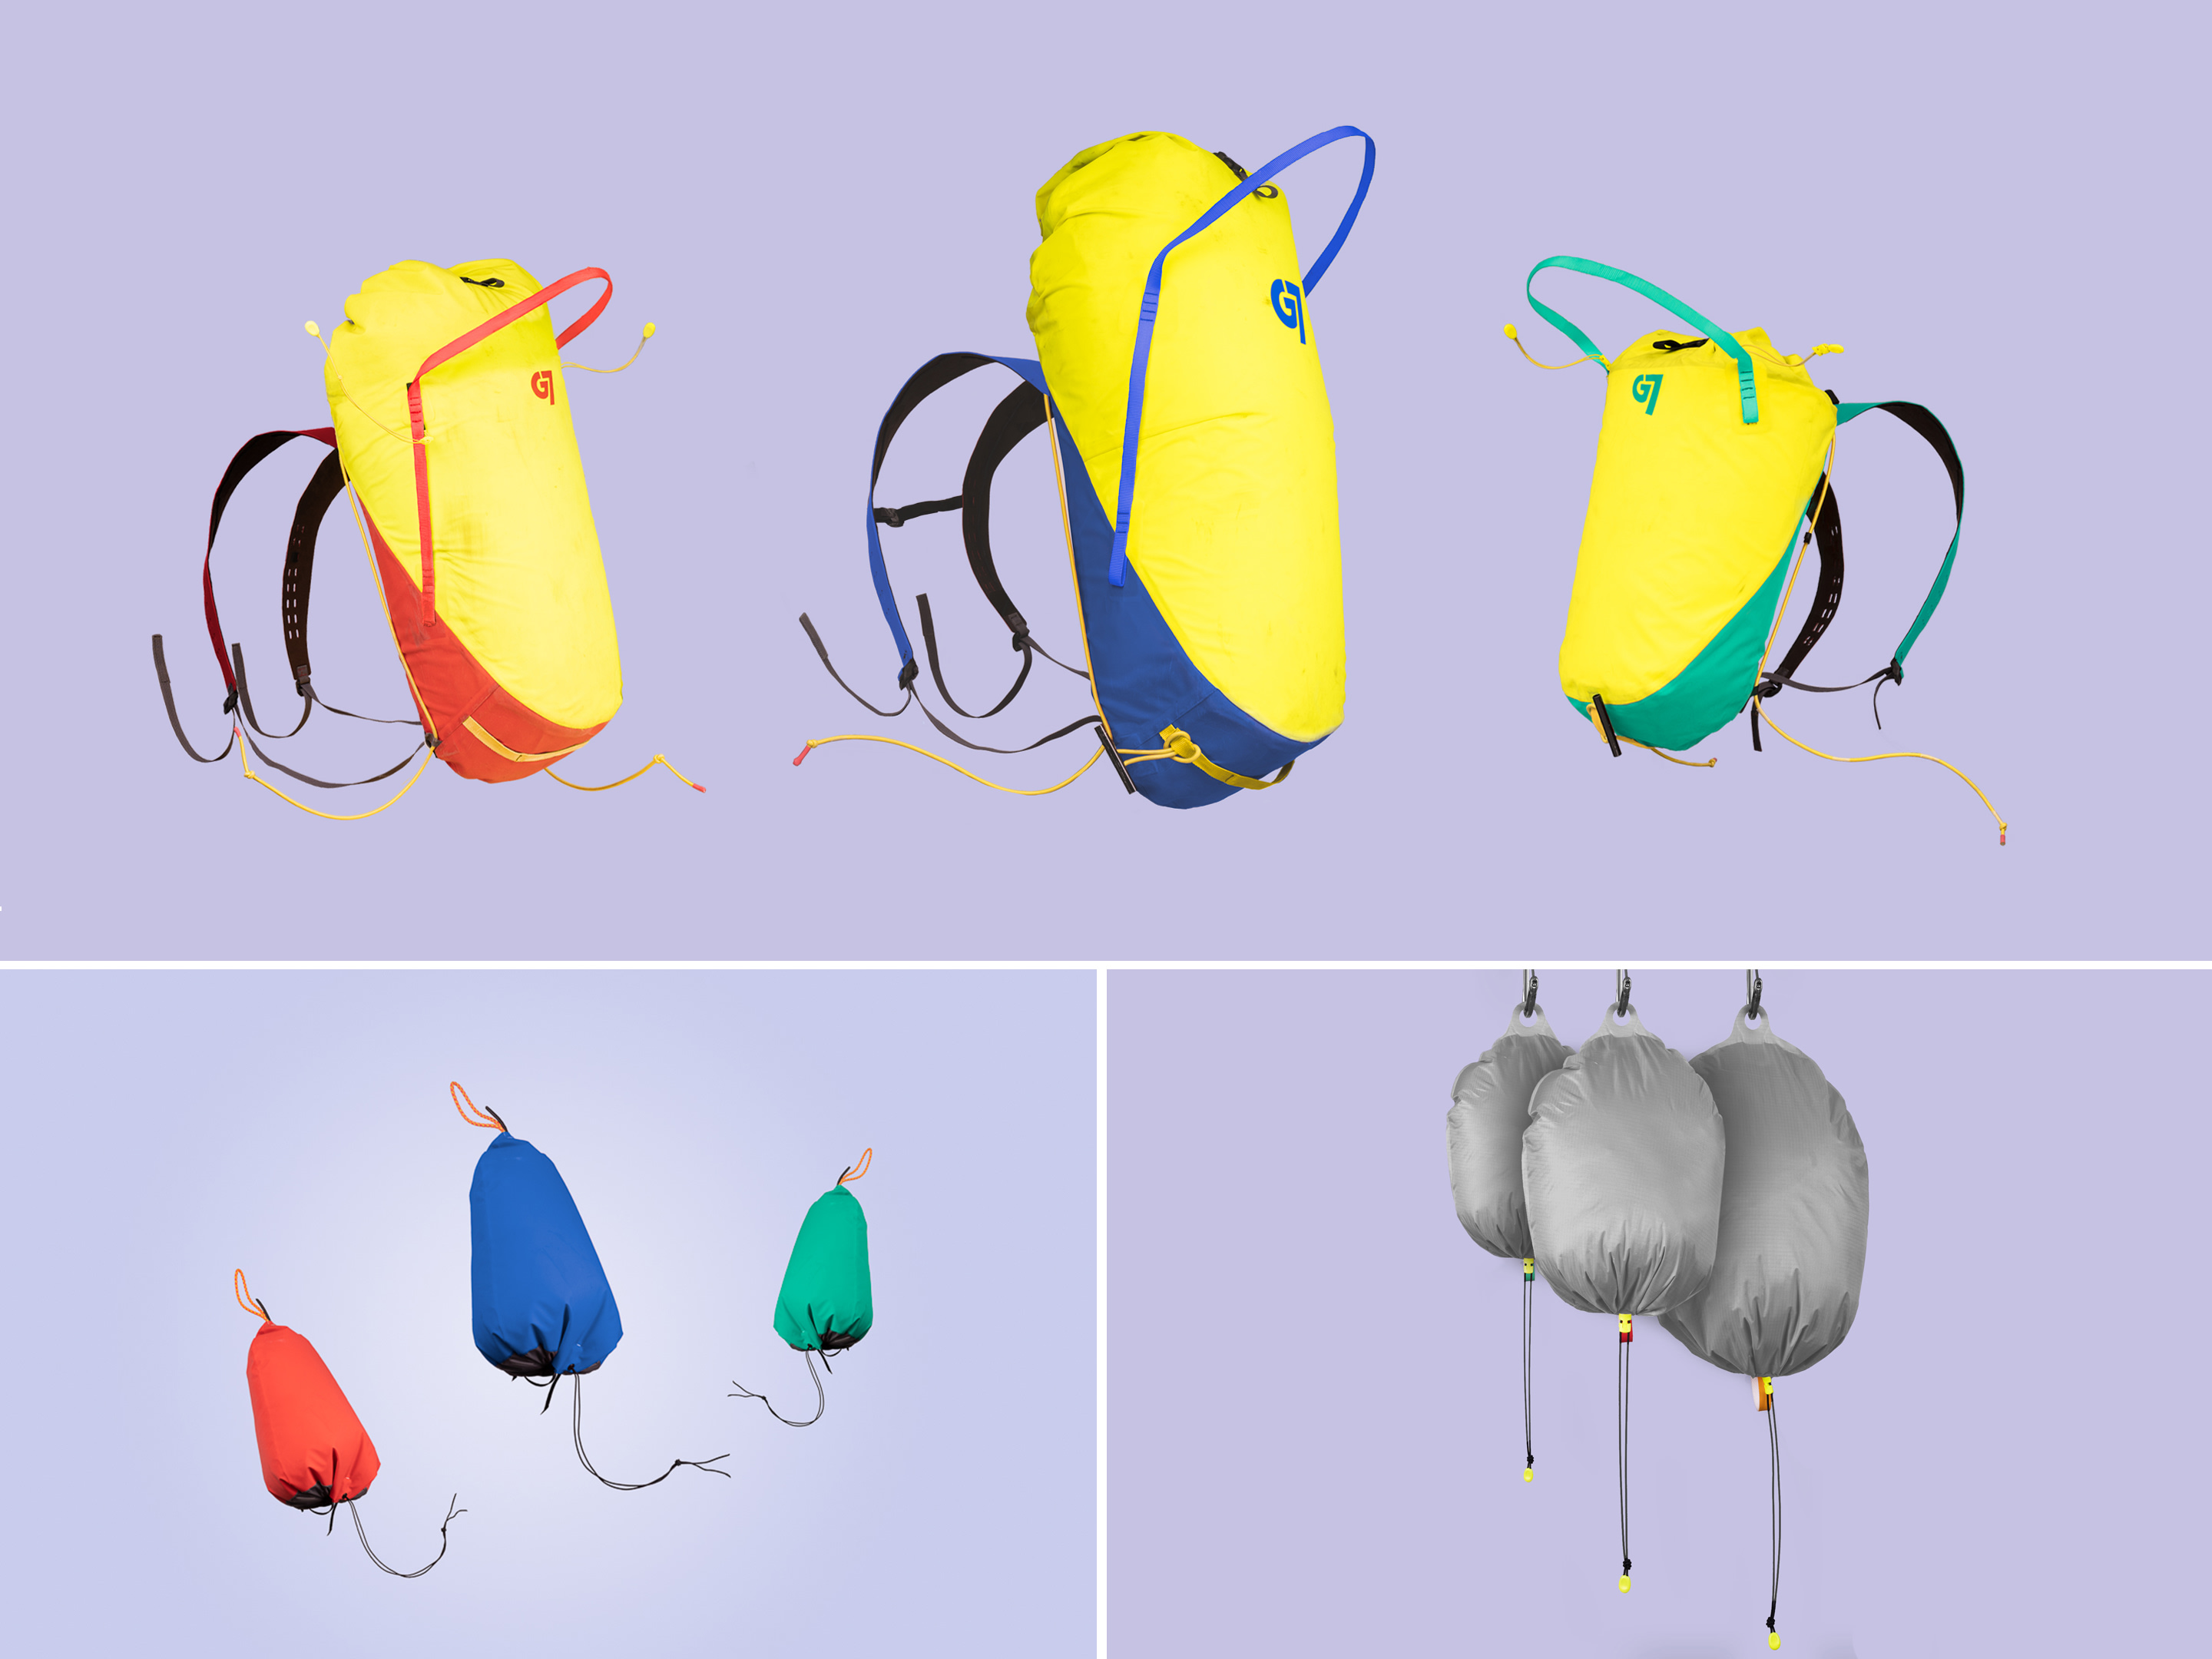 G7 Haul Pack Review: The First Meaningful Haul Bag Innovation in Decades